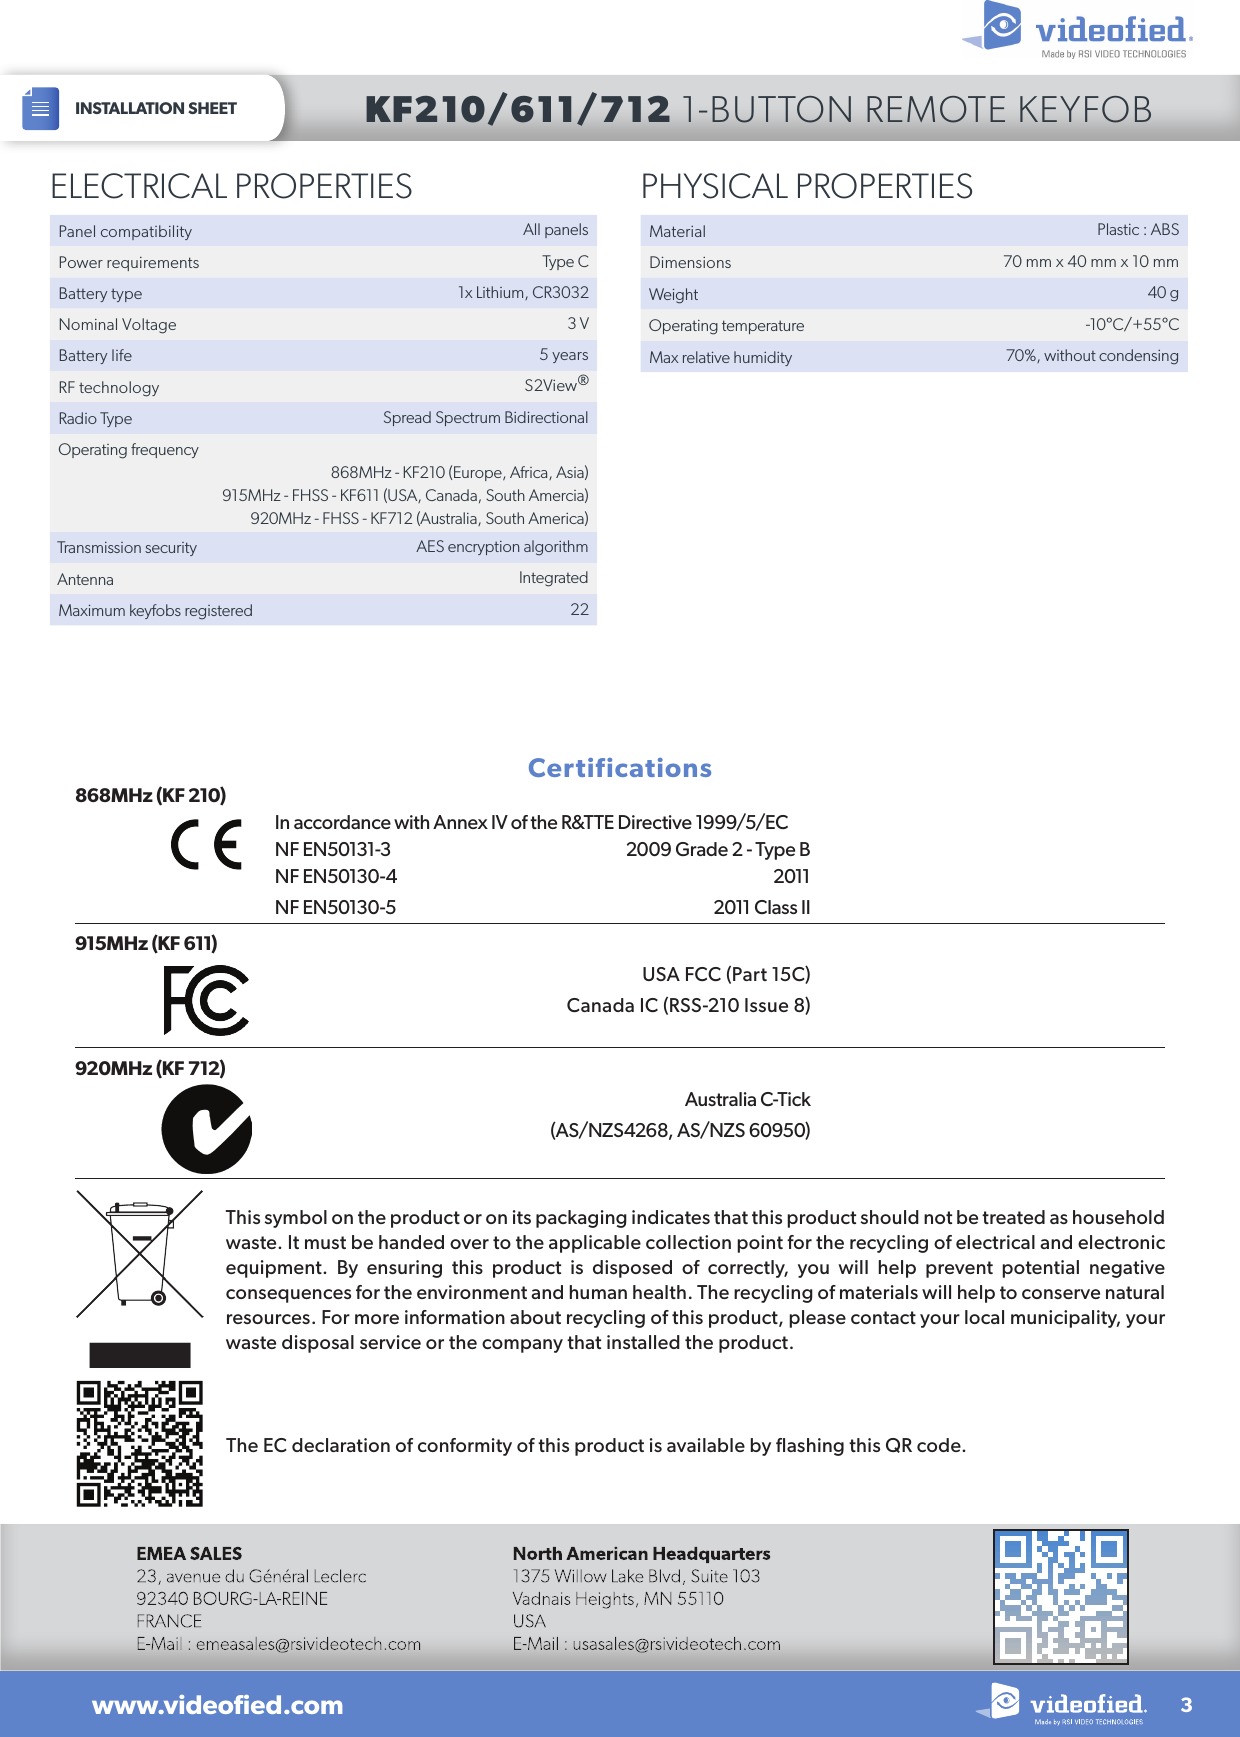 INSTALLATION SHEET3www.videoﬁed.comKF210/611/712 1-BUTTON REMOTE KEYFOBCertifications868MHz (KF 210)In accordance with Annex IV of the R&amp;TTE Directive 1999/5/ECNF EN50131-3  2009 Grade 2 - Type BNF EN50130-4  2011NF EN50130-5  2011 Class IIThis symbol on the product or on its packaging indicates that this product should not be treated as household waste. It must be handed over to the applicable collection point for the recycling of electrical and electronic equipment. By ensuring this product is disposed of correctly, you will help prevent potential negative consequences for the environment and human health. The recycling of materials will help to conserve natural resources. For more information about recycling of this product, please contact your local municipality, your waste disposal service or the company that installed the product.915MHz (KF 611)USA FCC (Part 15C)Canada IC (RSS-210 Issue 8)920MHz (KF 712)Australia C-Tick(AS/NZS4268, AS/NZS 60950)ELECTRICAL PROPERTIESPanel compatibility All panelsPower requirements Type CBattery type 1x Lithium, CR3032Nominal Voltage 3 VBattery life 5 yearsRF technology S2View®Radio Type Spread Spectrum BidirectionalOperating frequency868MHz - KF210 (Europe, Africa, Asia)915MHz - FHSS - KF611 (USA, Canada, South Amercia)920MHz - FHSS - KF712 (Australia, South America)Transmission security AES encryption algorithmAntenna IntegratedMaximum keyfobs registered 22PHYSICAL PROPERTIESMaterial Plastic : ABSDimensions 70 mm x 40 mm x 10 mmWeight 40 gOperating temperature -10°C/+55°CMax relative humidity 70%, without condensingThe EC declaration of conformity of this product is available by flashing this QR code.